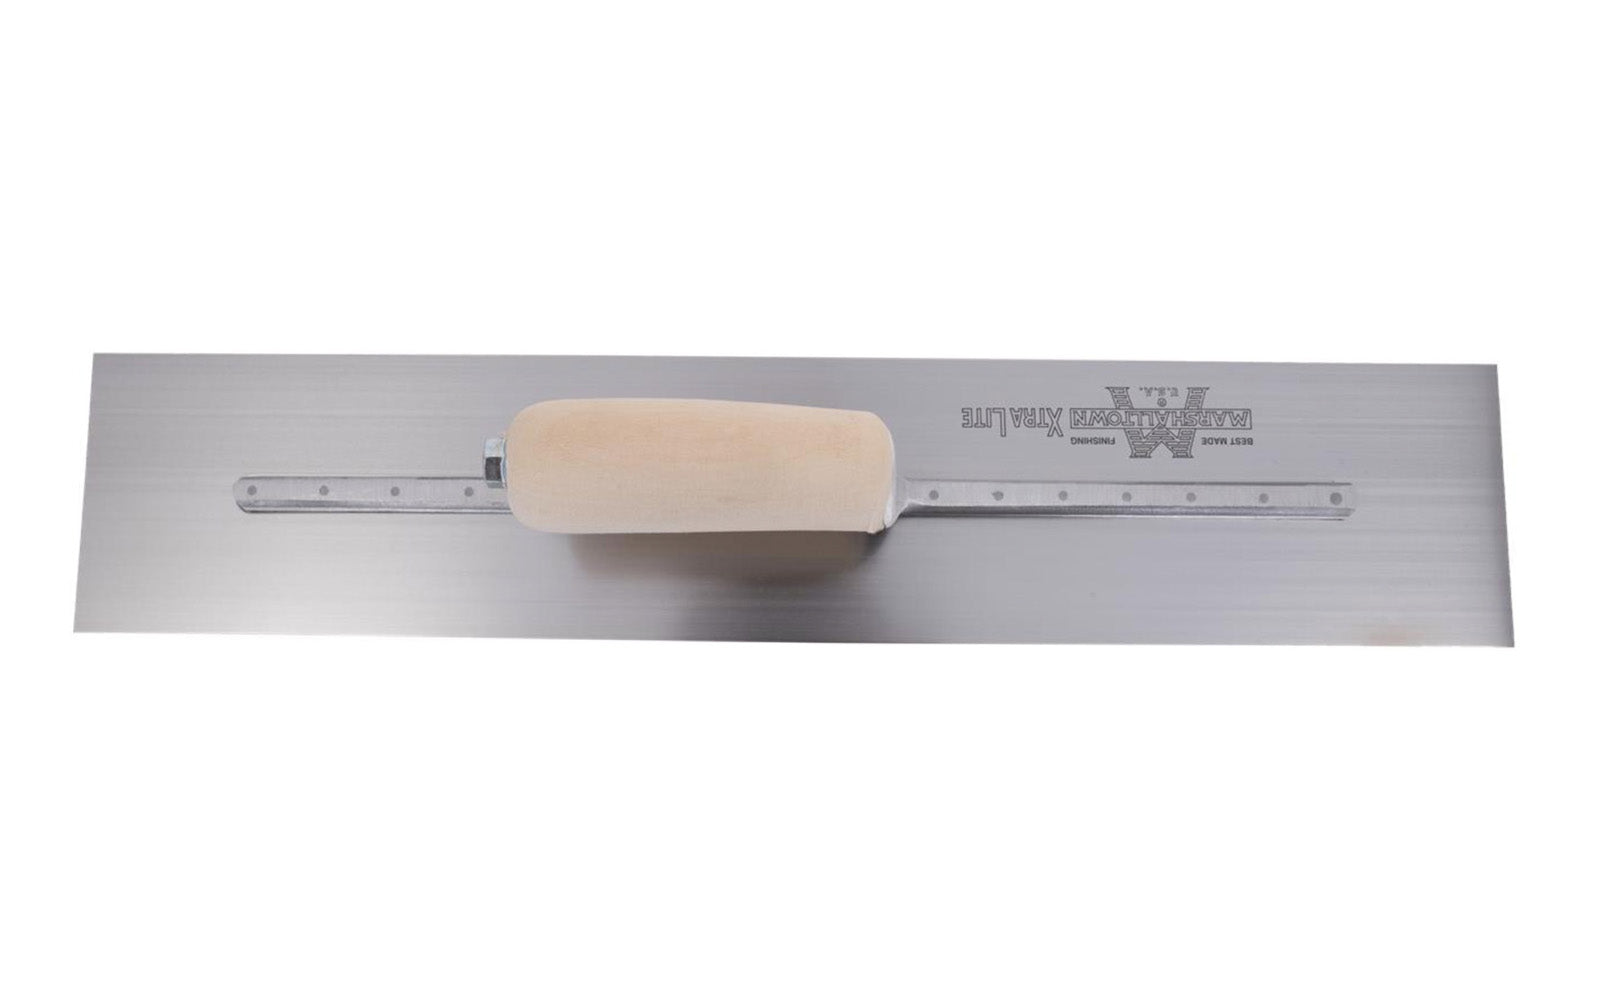 Marshalltown 18" x 4" Finishing Trowel with a blade that is tempered, ground, and polished for enhanced performance. MXS81.